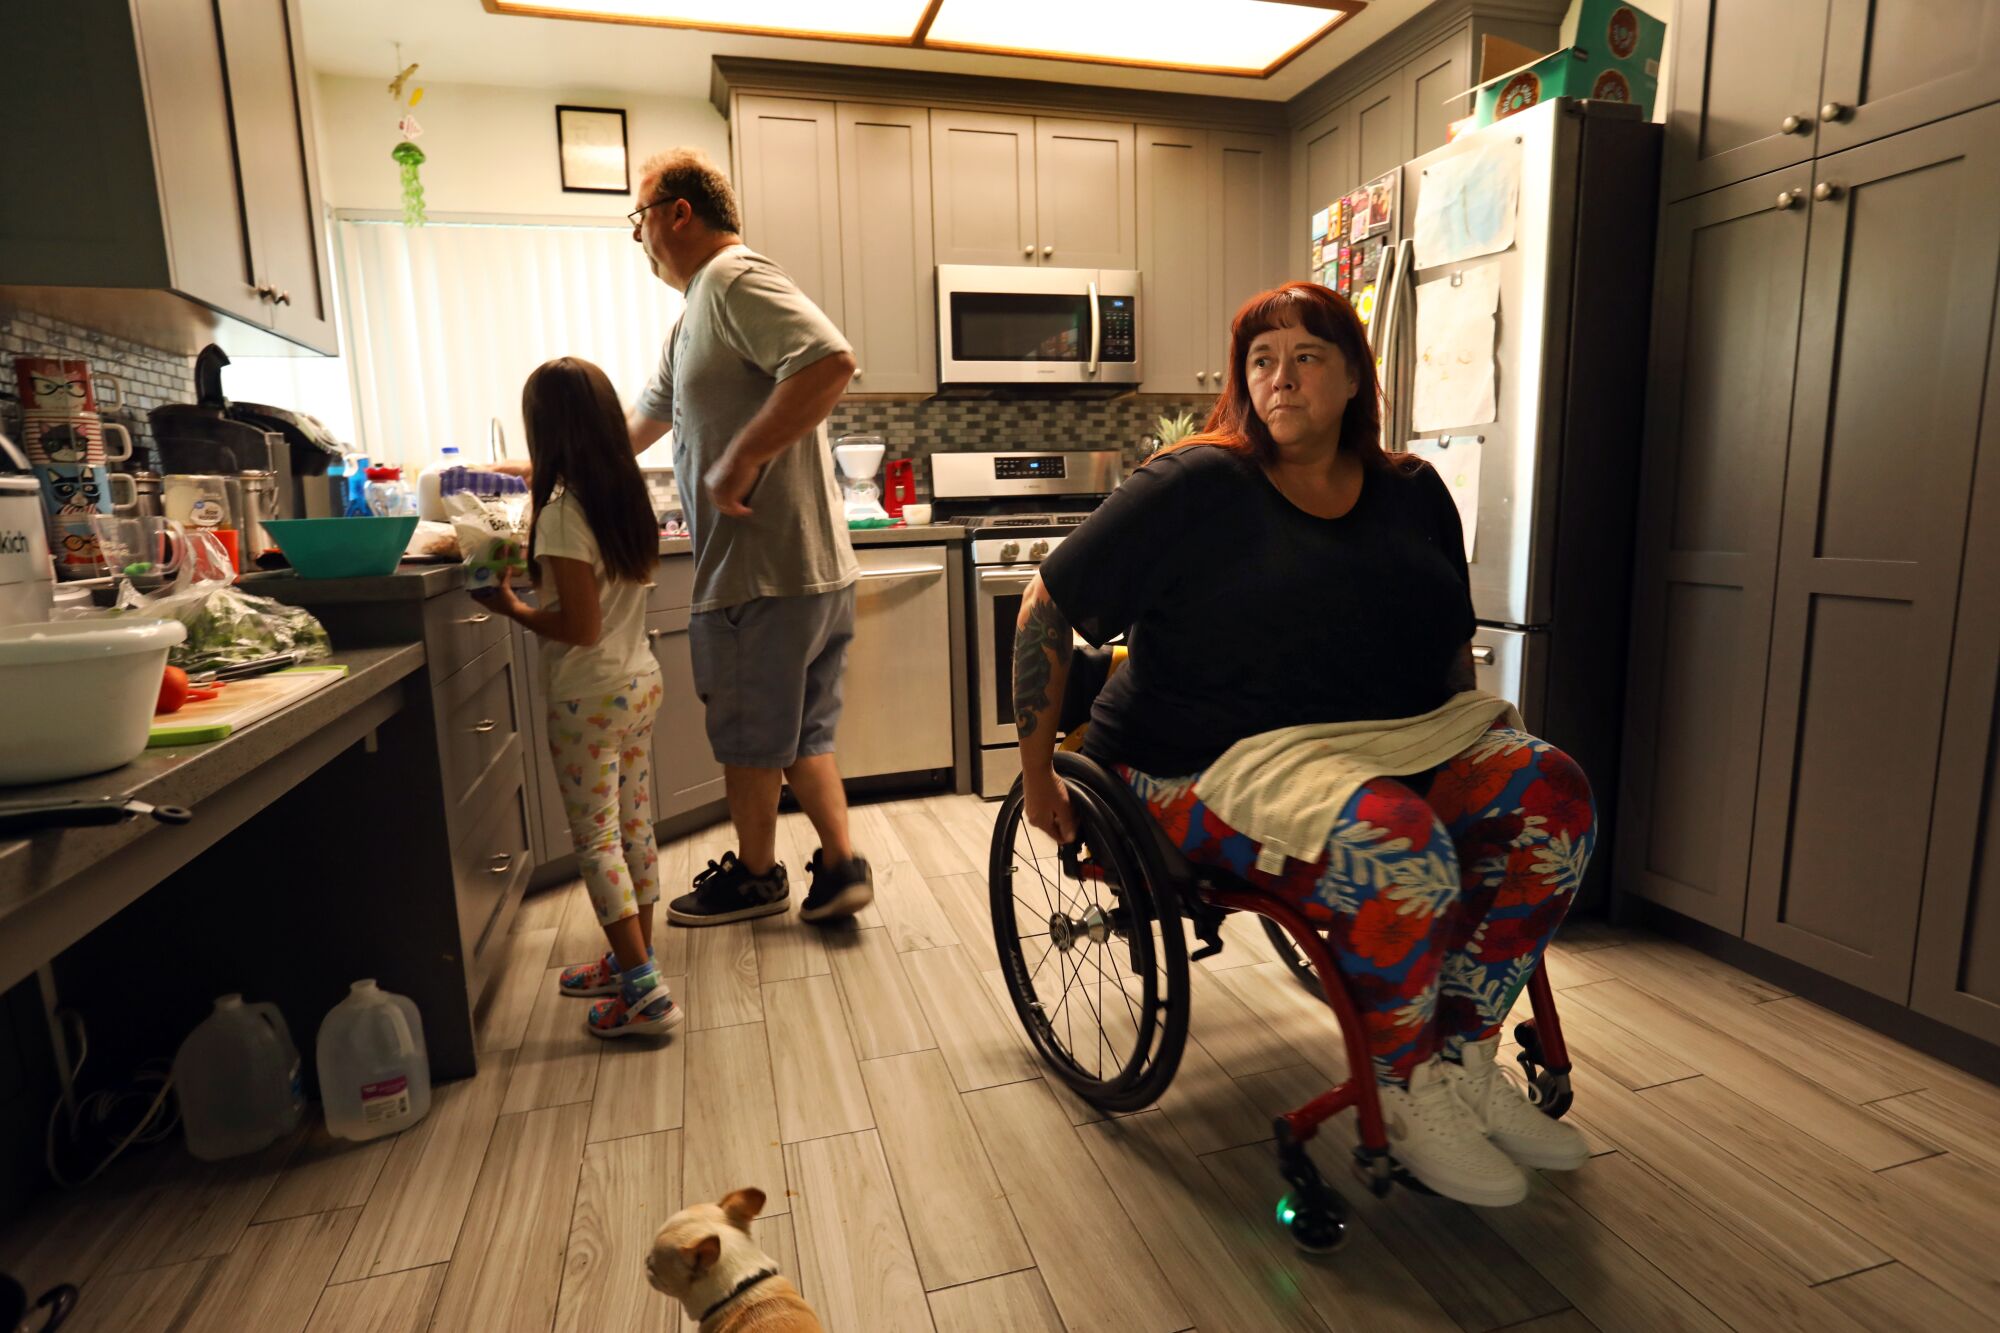 A woman sits in a wheelchair in her kitchen as her husband and granddaughter prepare food at the counter